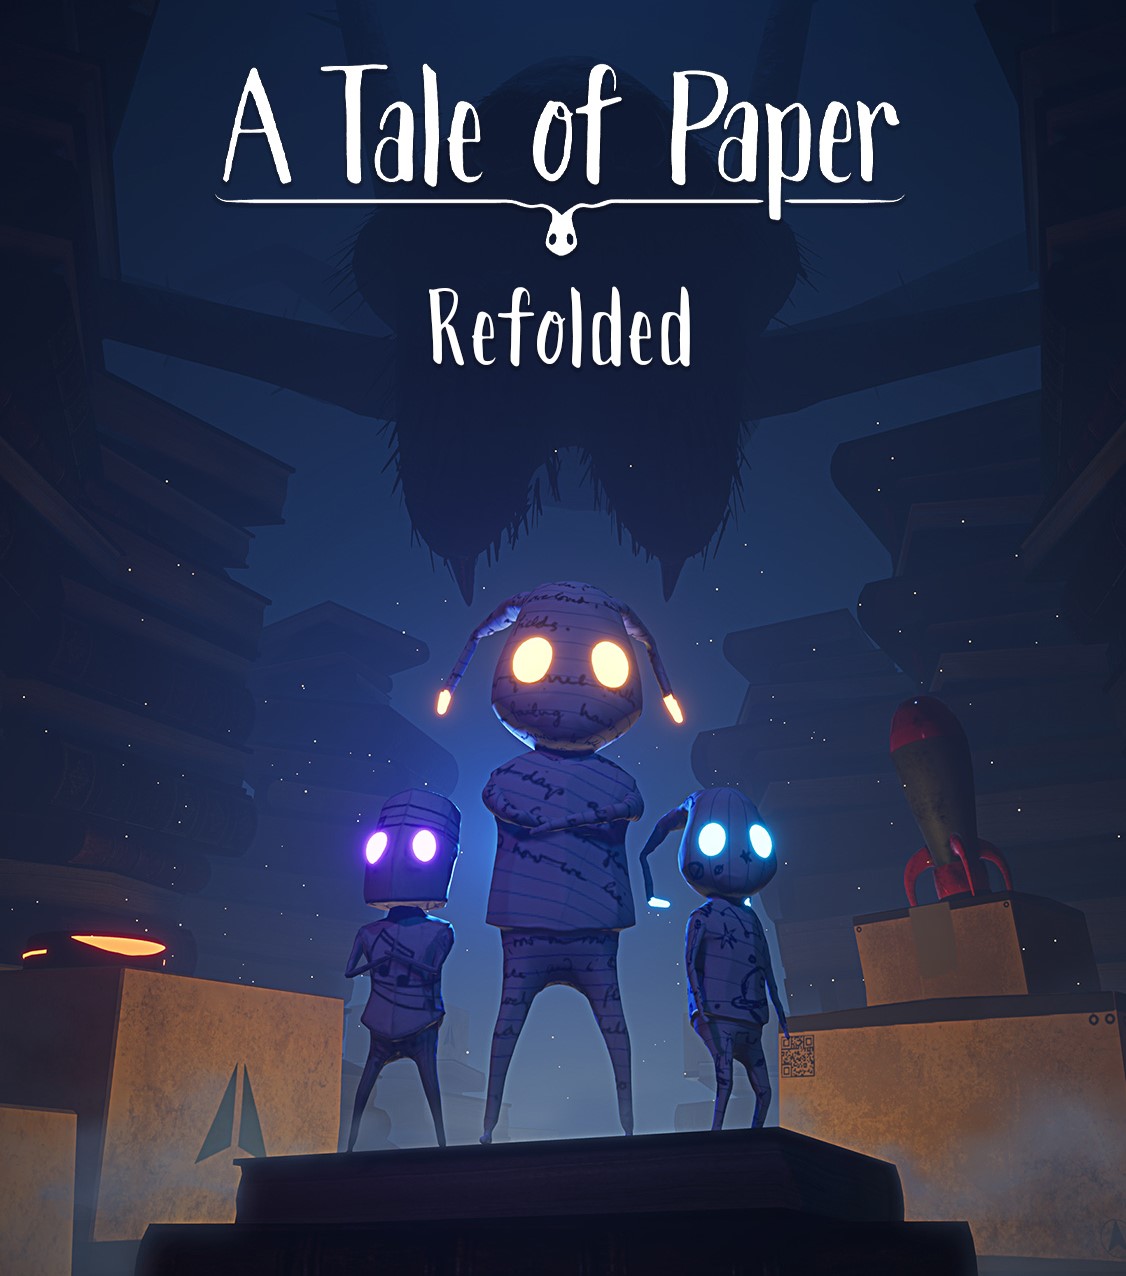 A tale of Paper